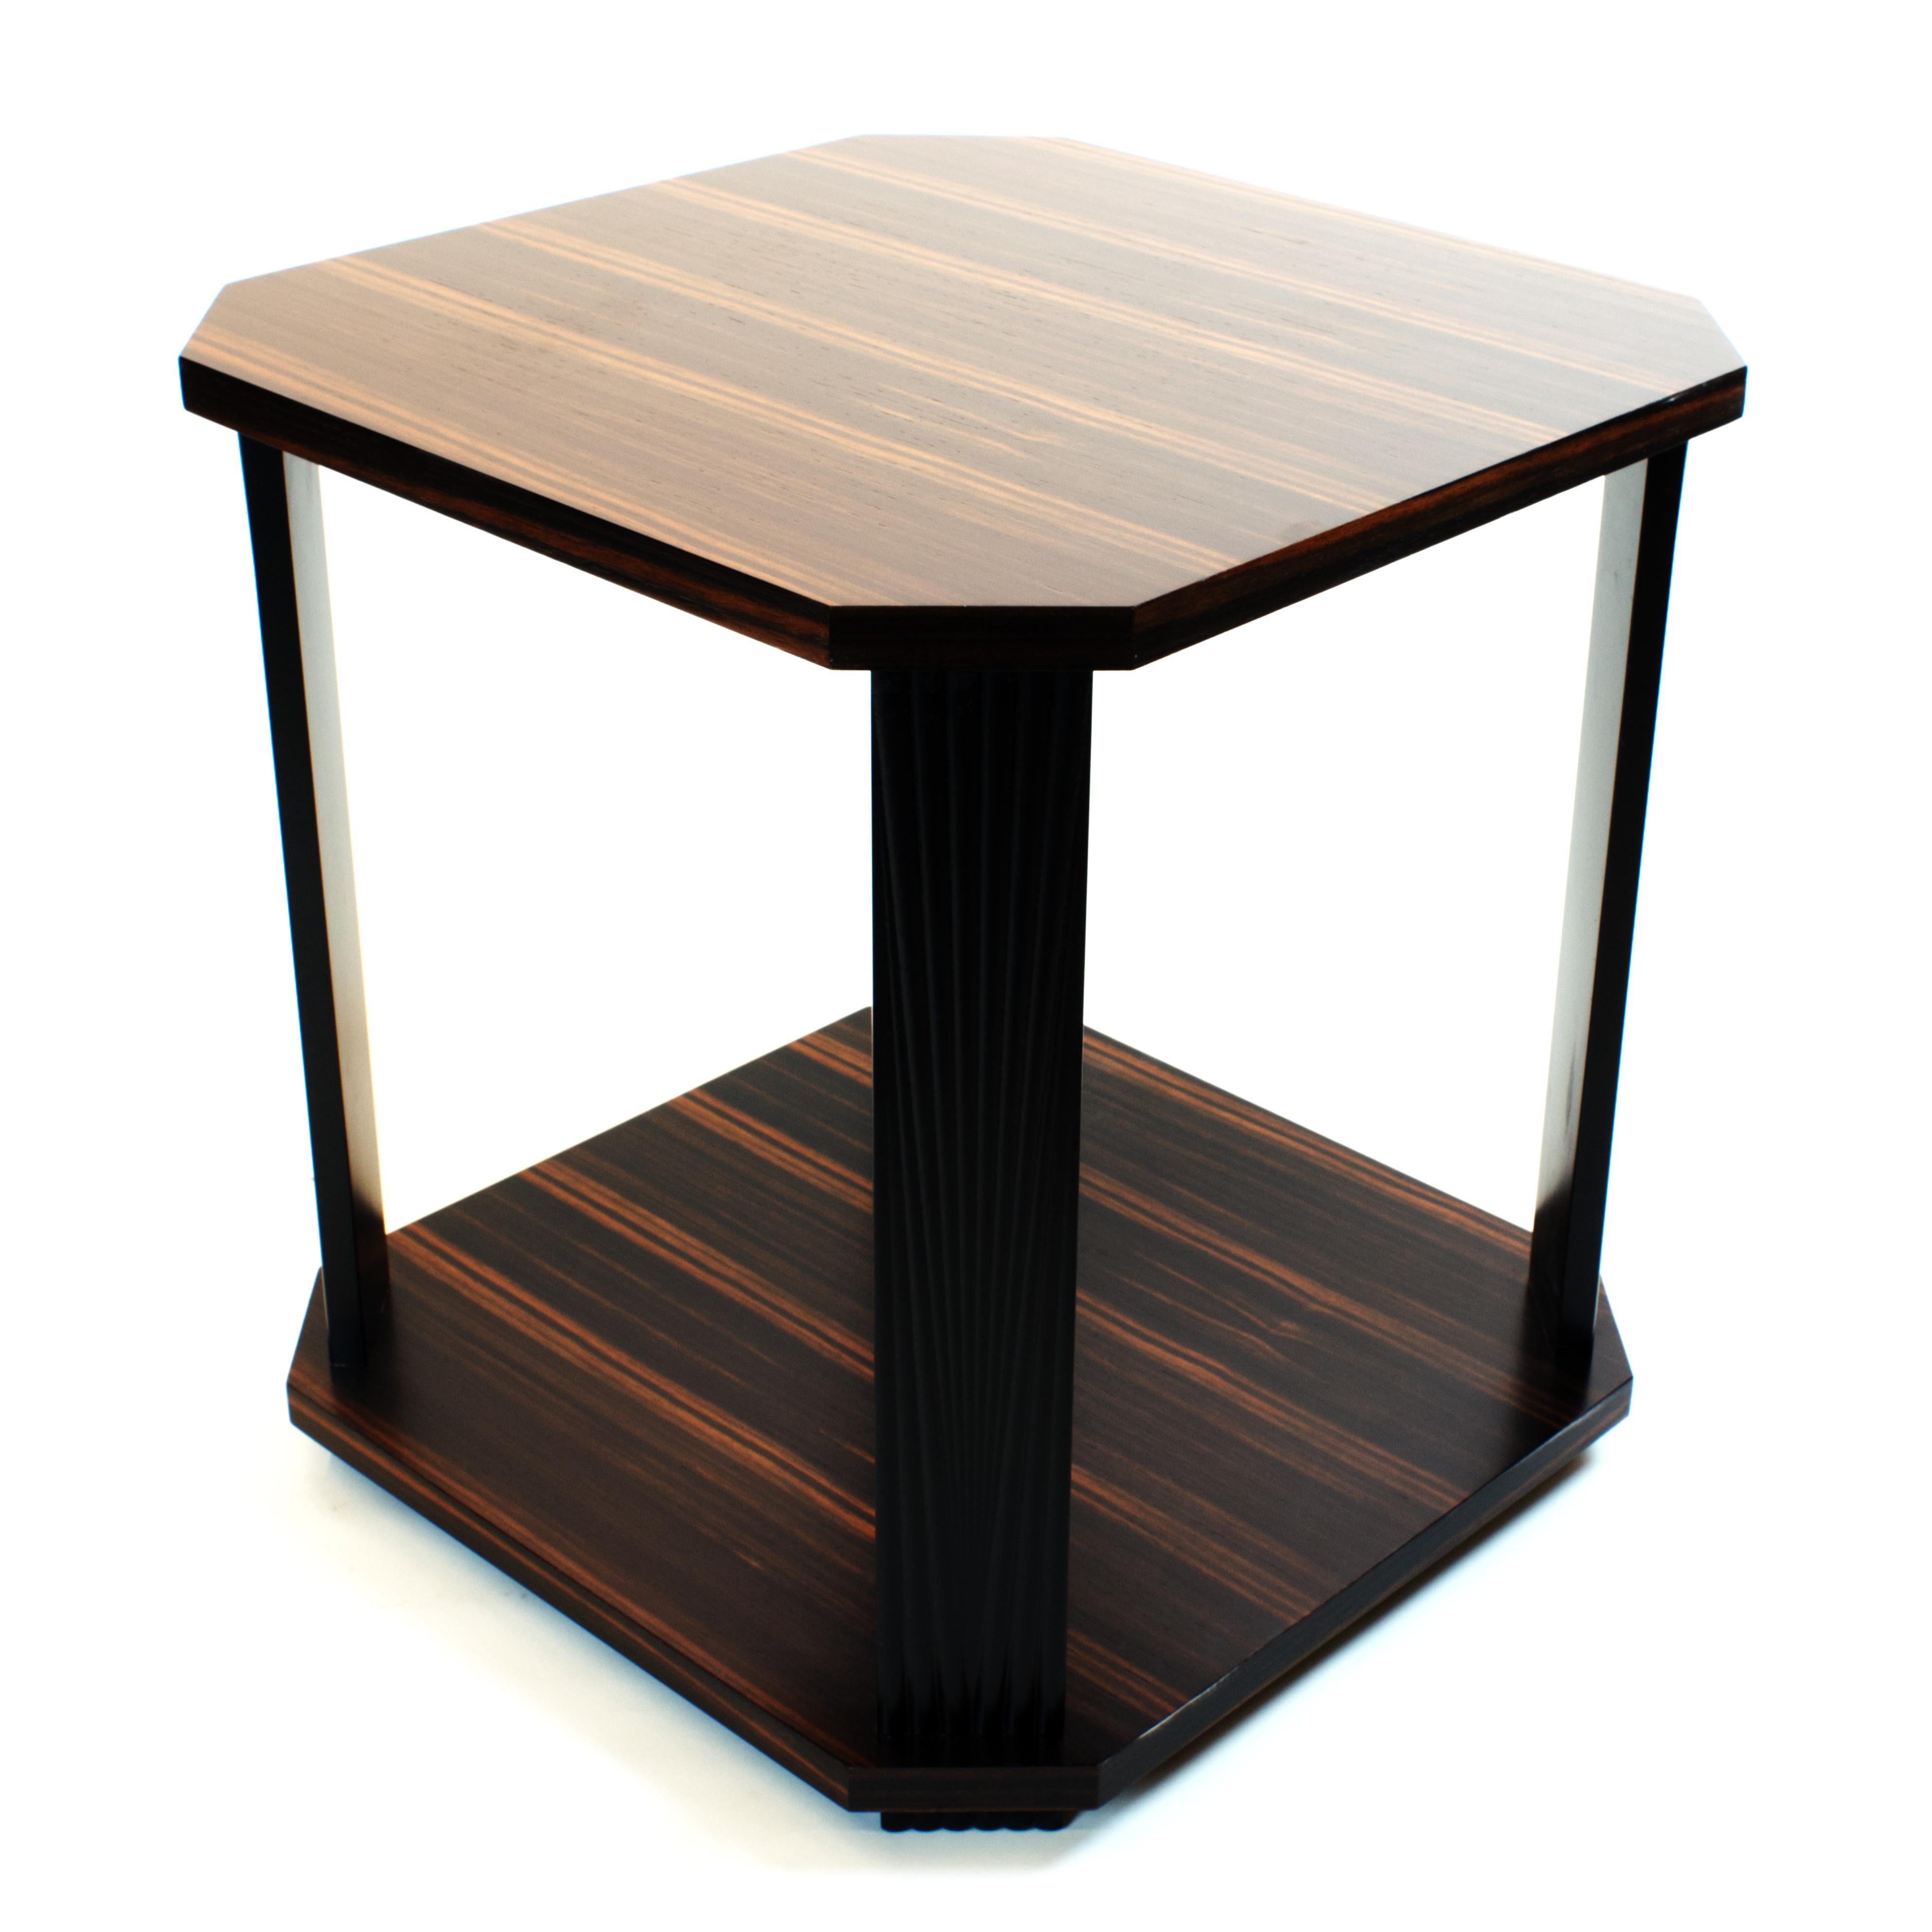 Art Deco inspired side table in genuine Ebony Macassar veneer. This reiteration of a classic design from 1930s is available in various exotic veneers and finishes with fully customizable size to complement your interiors. Minimalistic shape of the